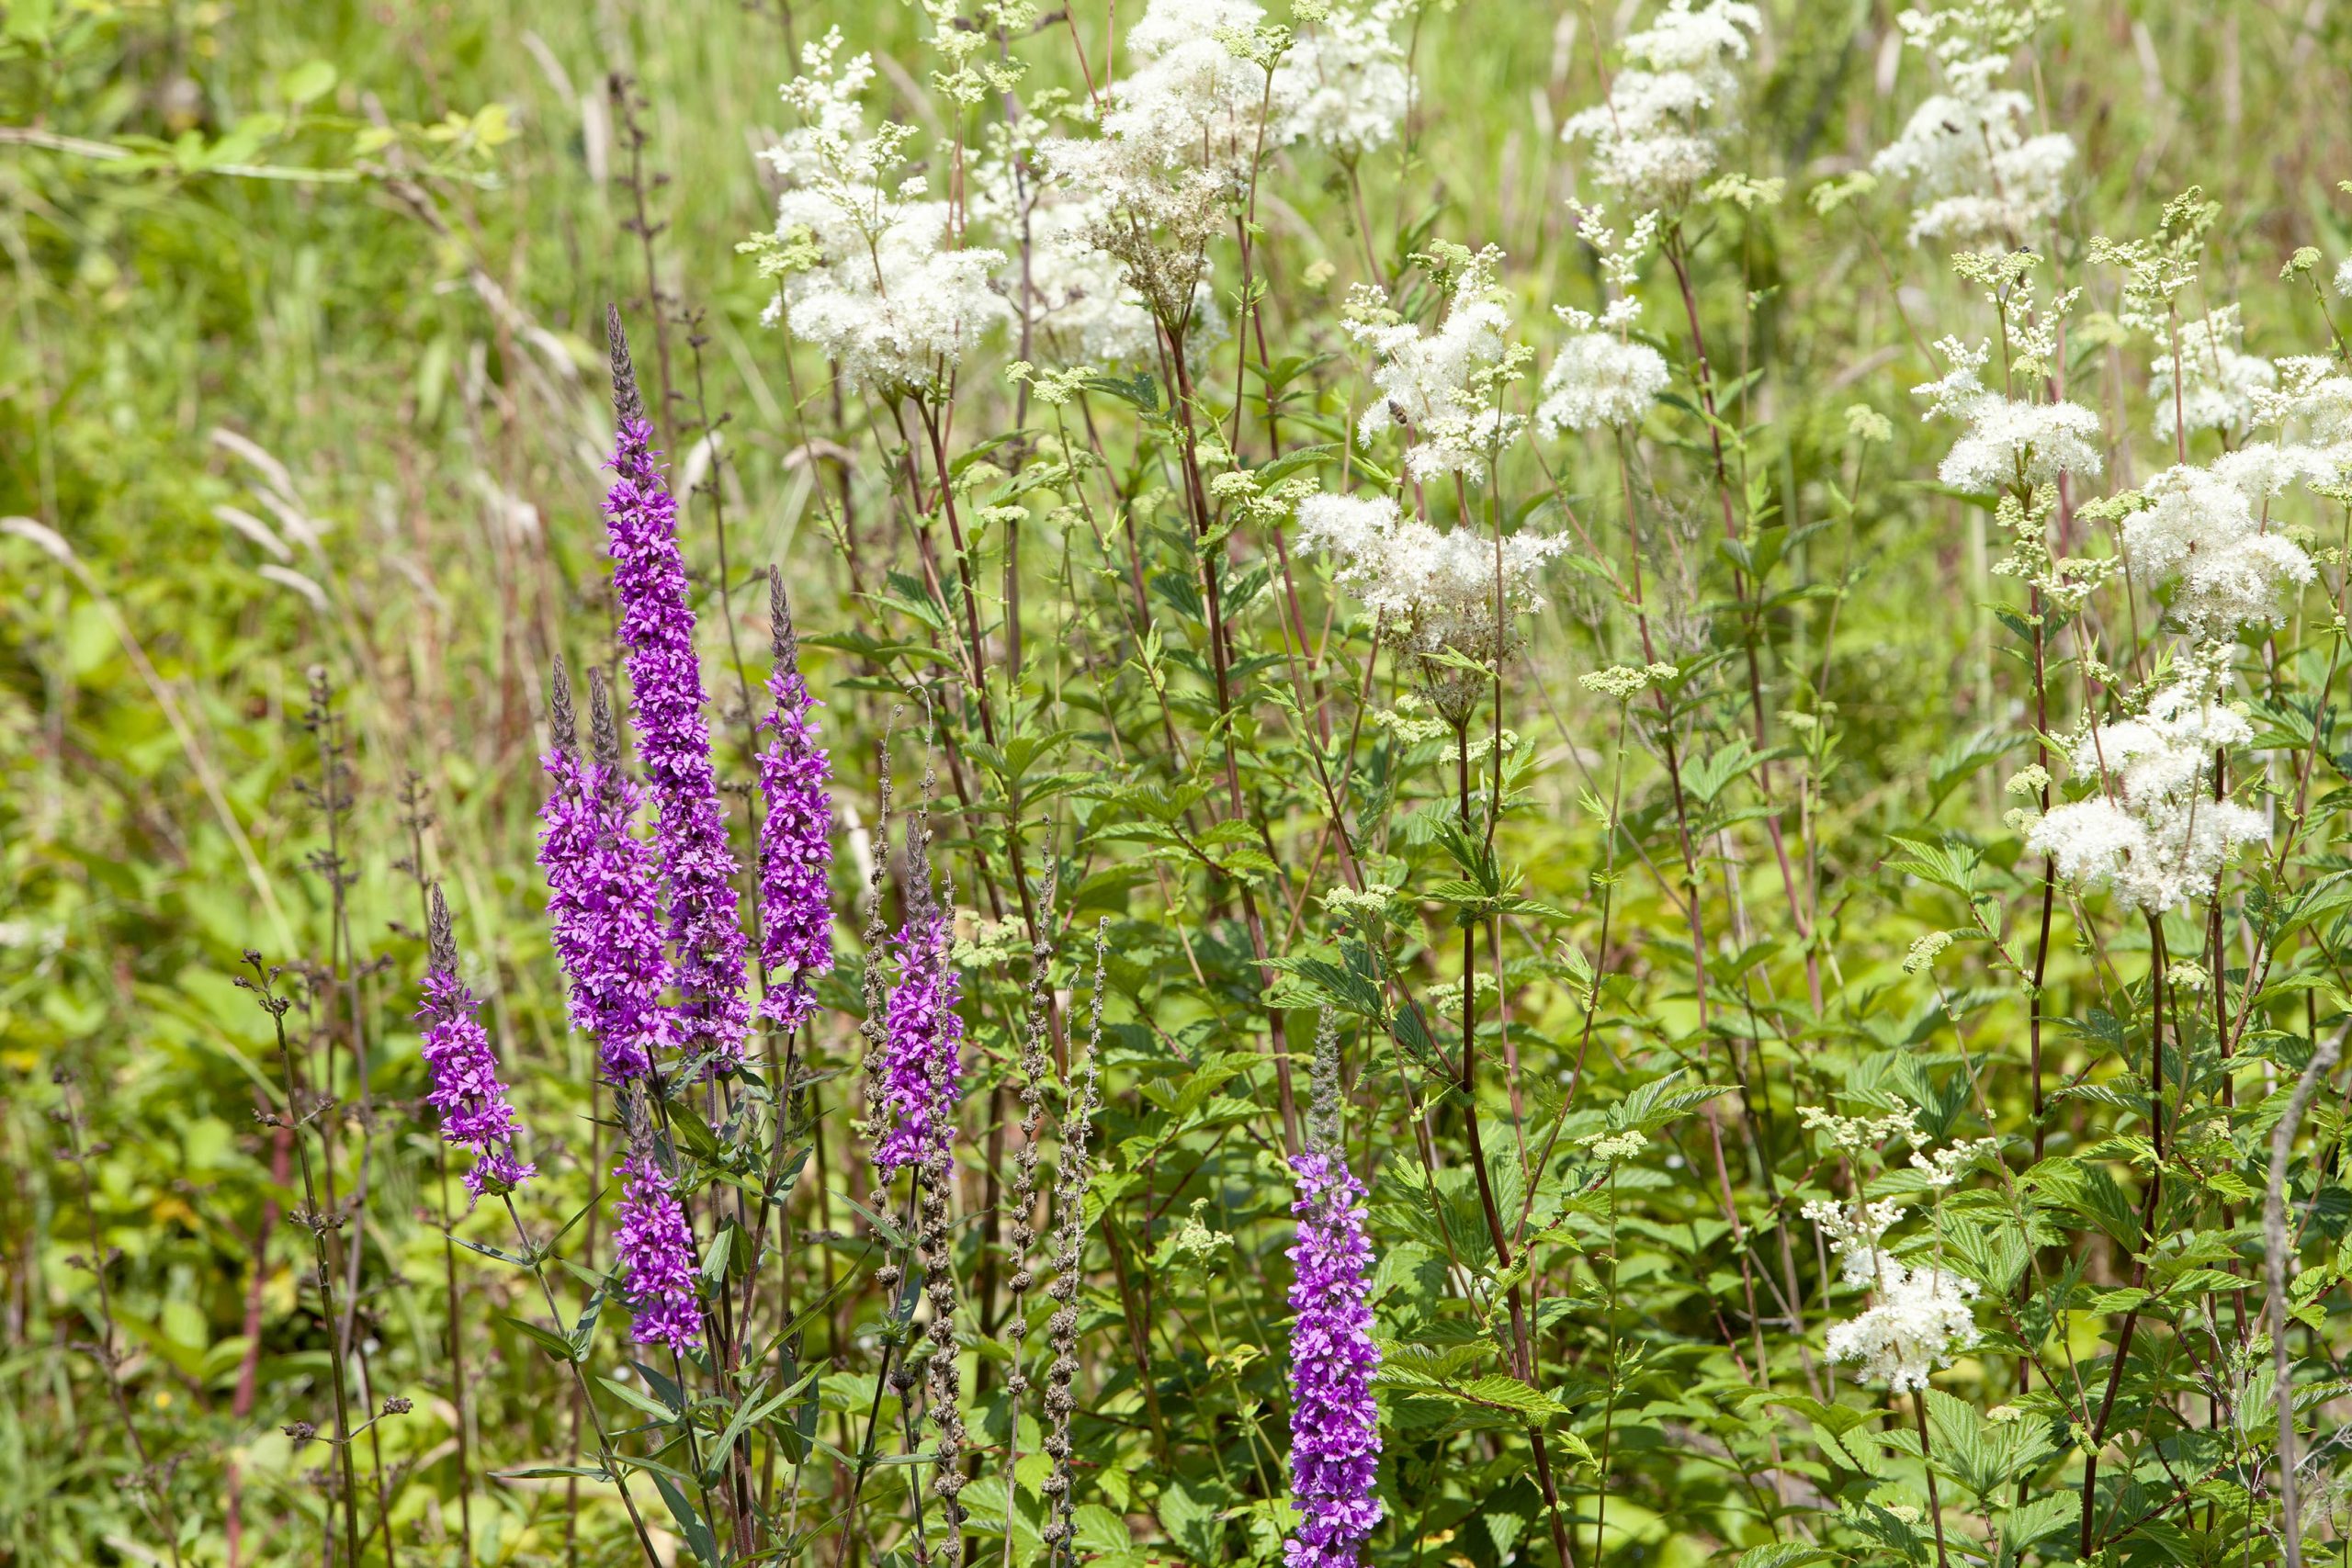 Image of wildflowers at Penryn Campus